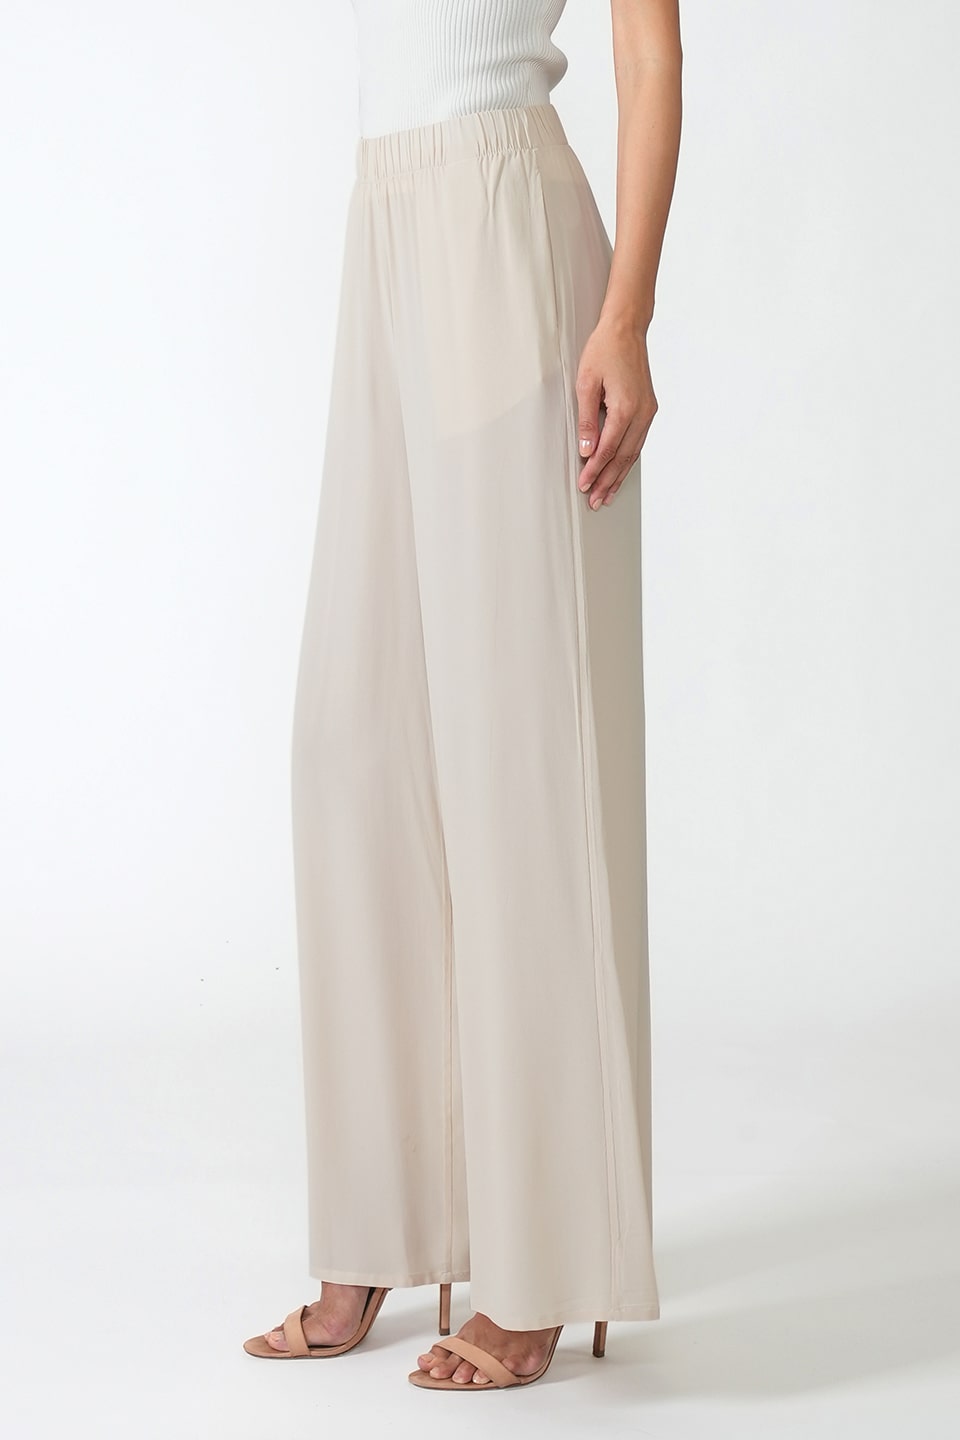 Designer Ivory Women pants, shop online with free delivery in UAE. Product gallery 3